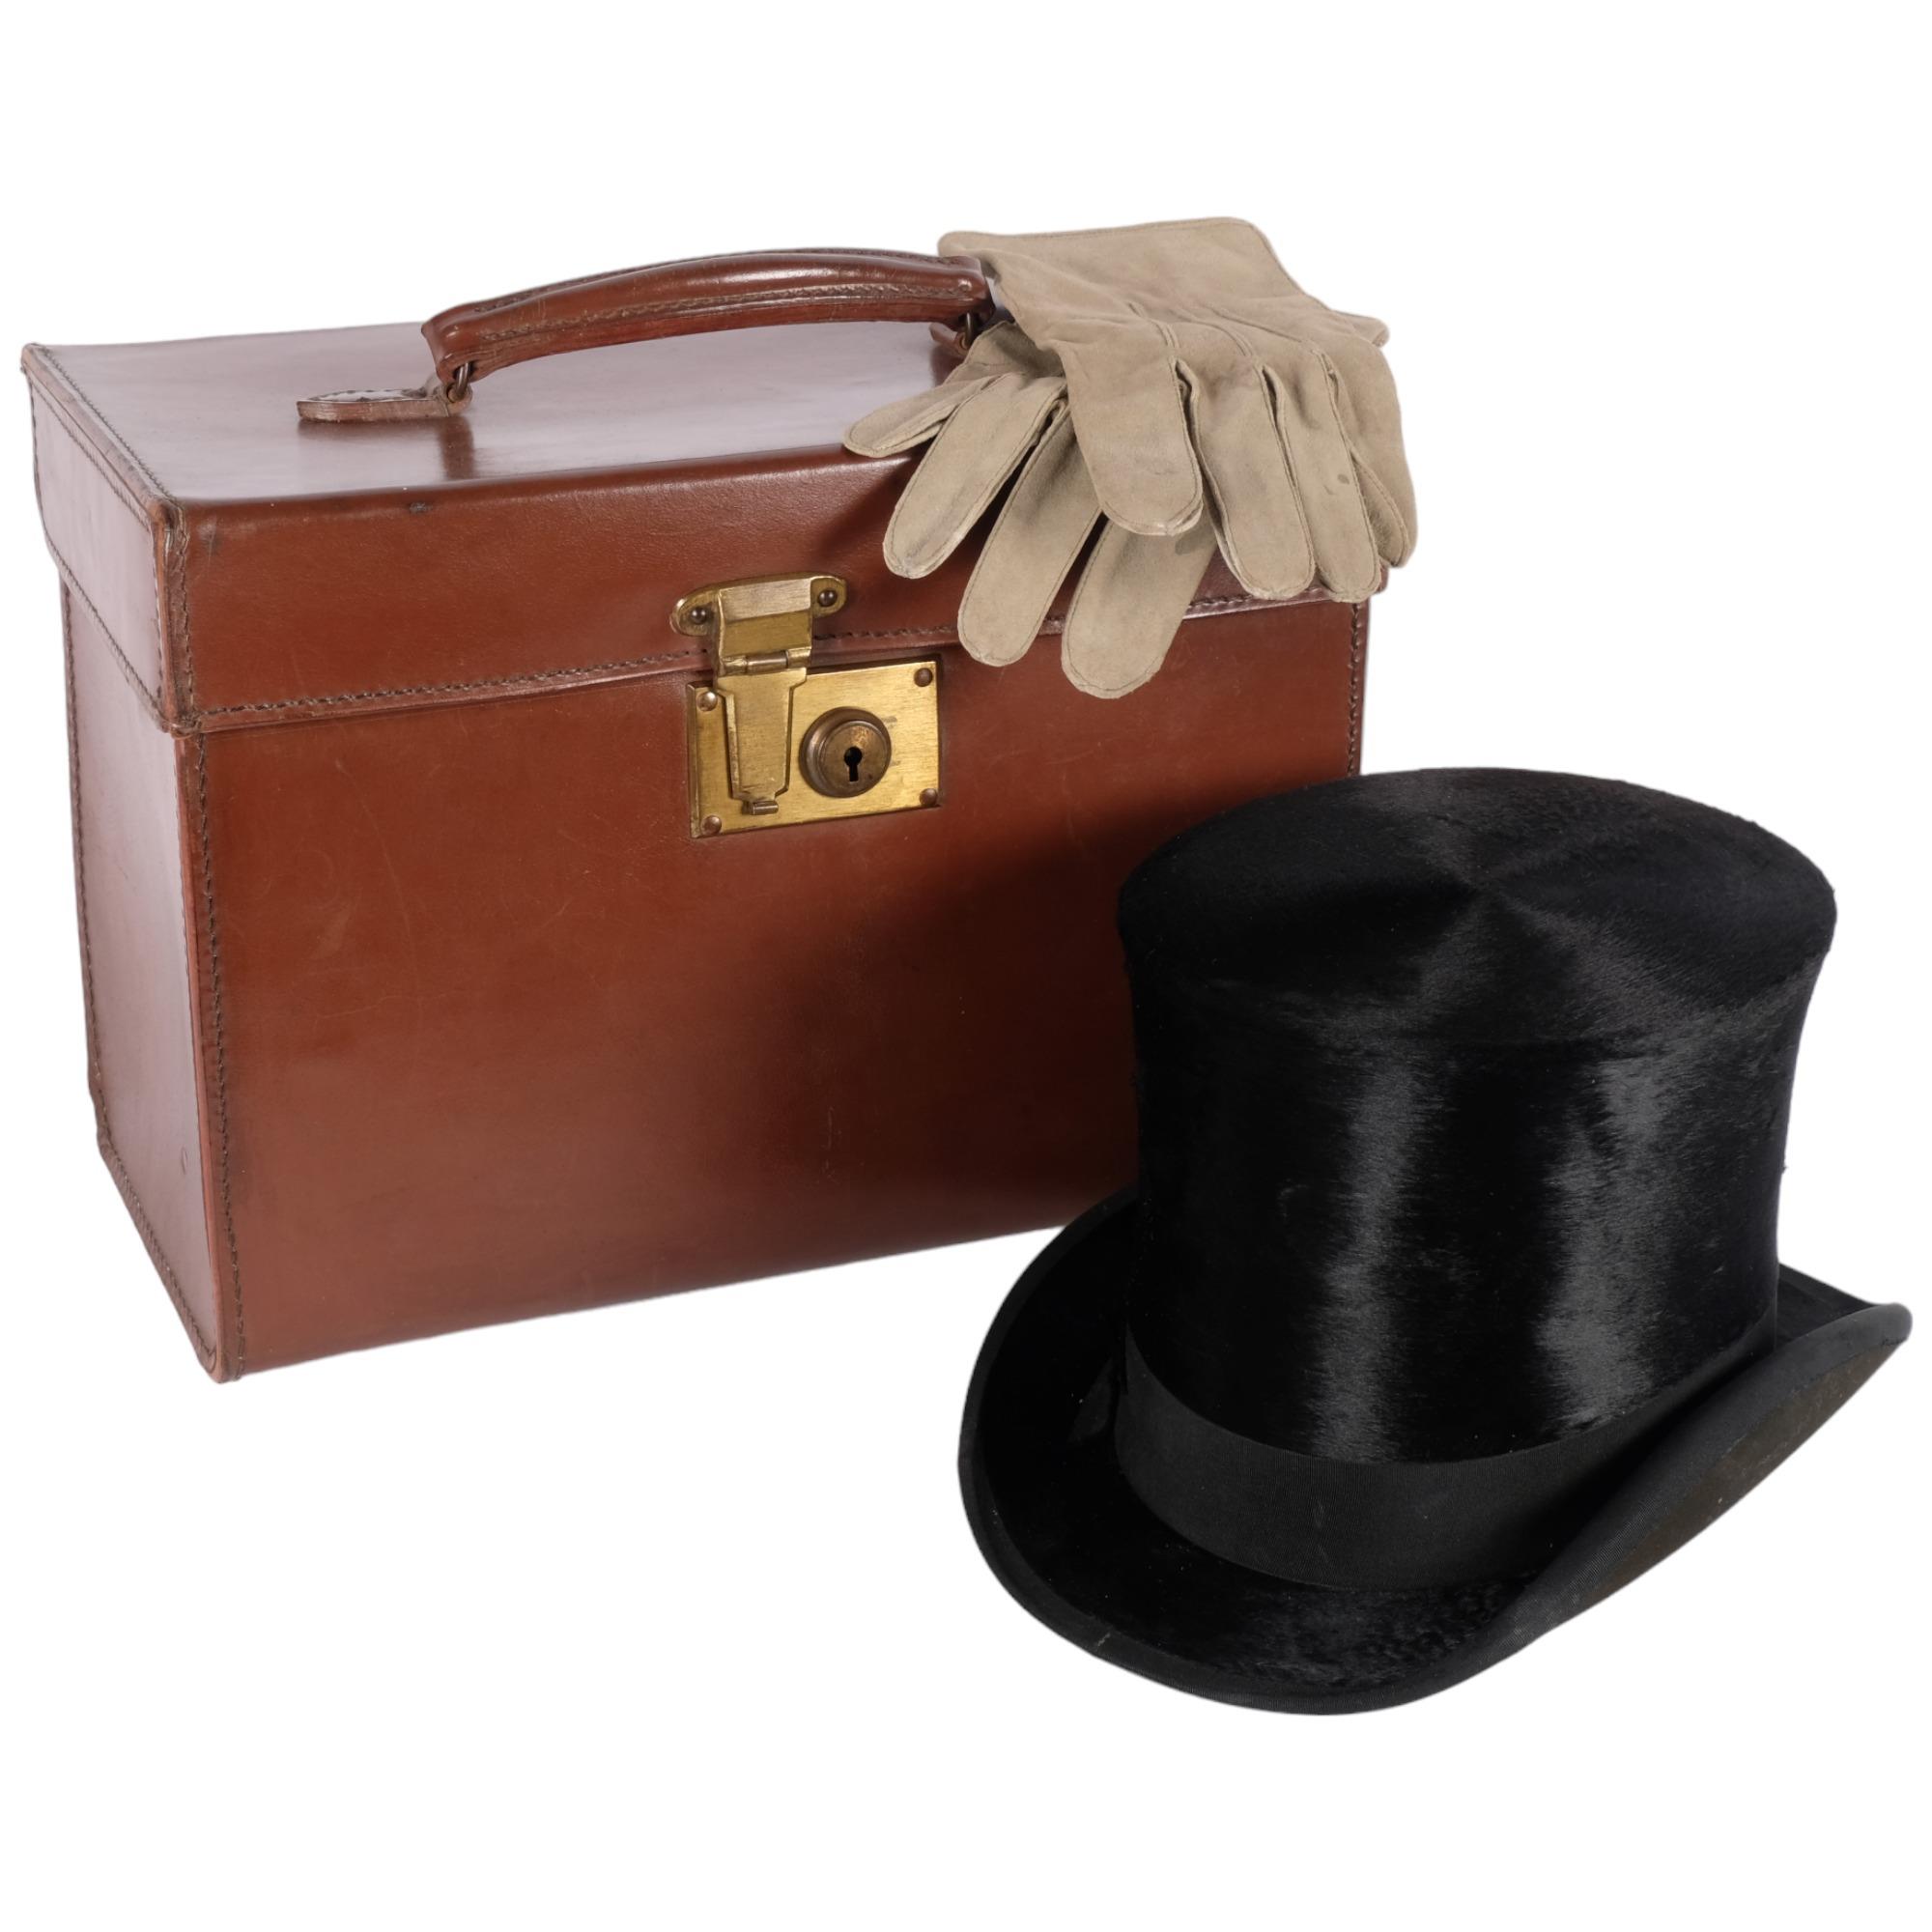 Antique leather hat box with brass lock, containing a top hat by Cockayne of Sheffield, size 6 and